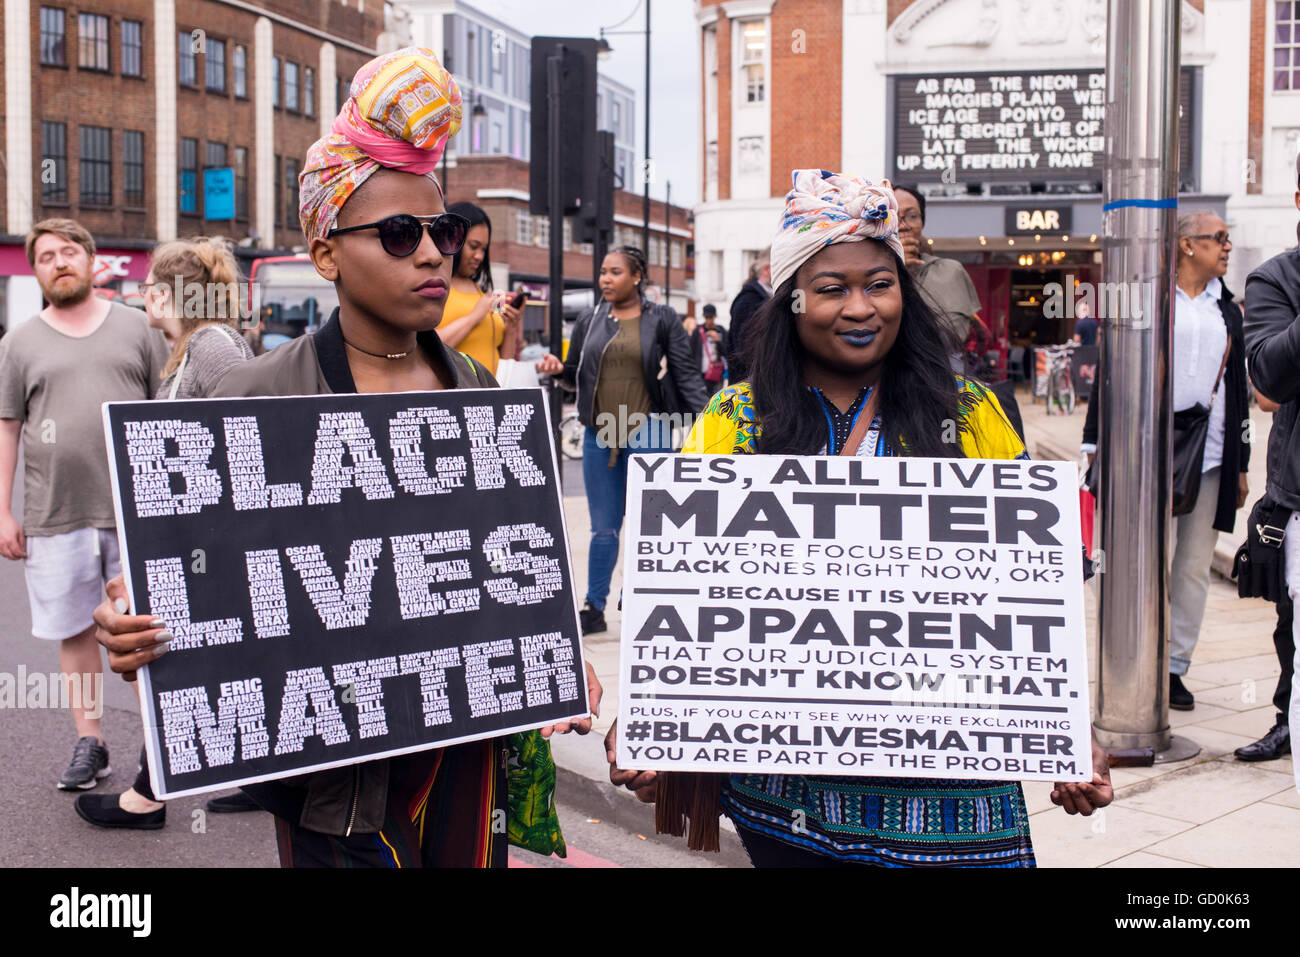 Brixton, London, UK. 9th July 2016. Young protesters holding posters supporting Black Lives Matter. Hundreds of Black Lives Matter Supporters marched on the local police station before a sit-in protest on Brixton High Street which brought London streets to standstill. The march is in response to the fatal shootings of Philando Castile in Minnesota and Alton Sterling in Louisiana. Credit:  Nicola Ferrari/Alamy Live News. Stock Photo